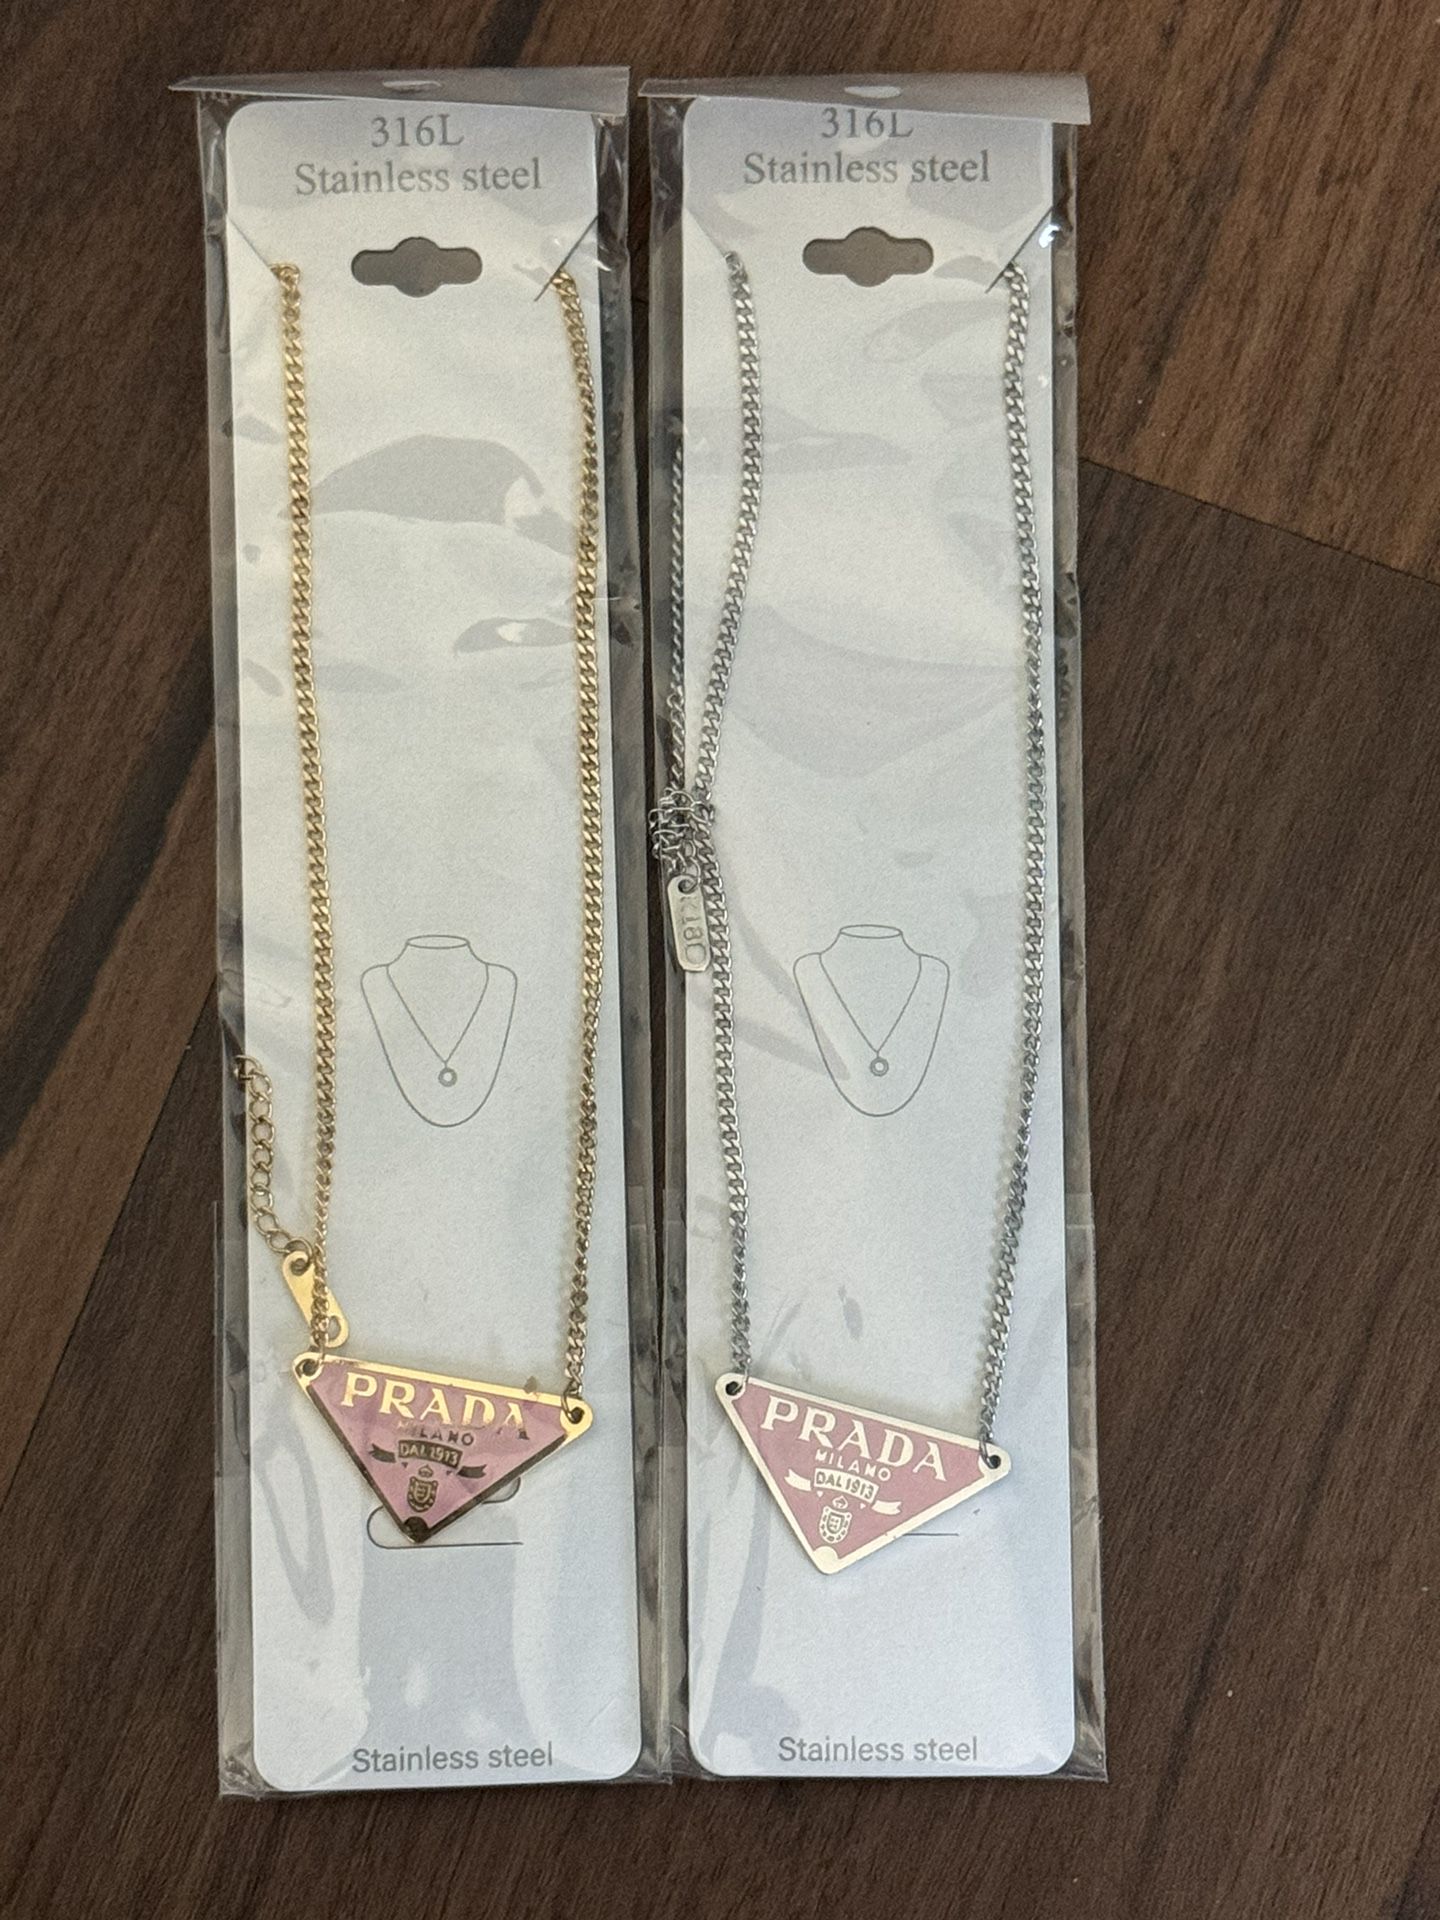 Prada Stainless Steel Necklaces